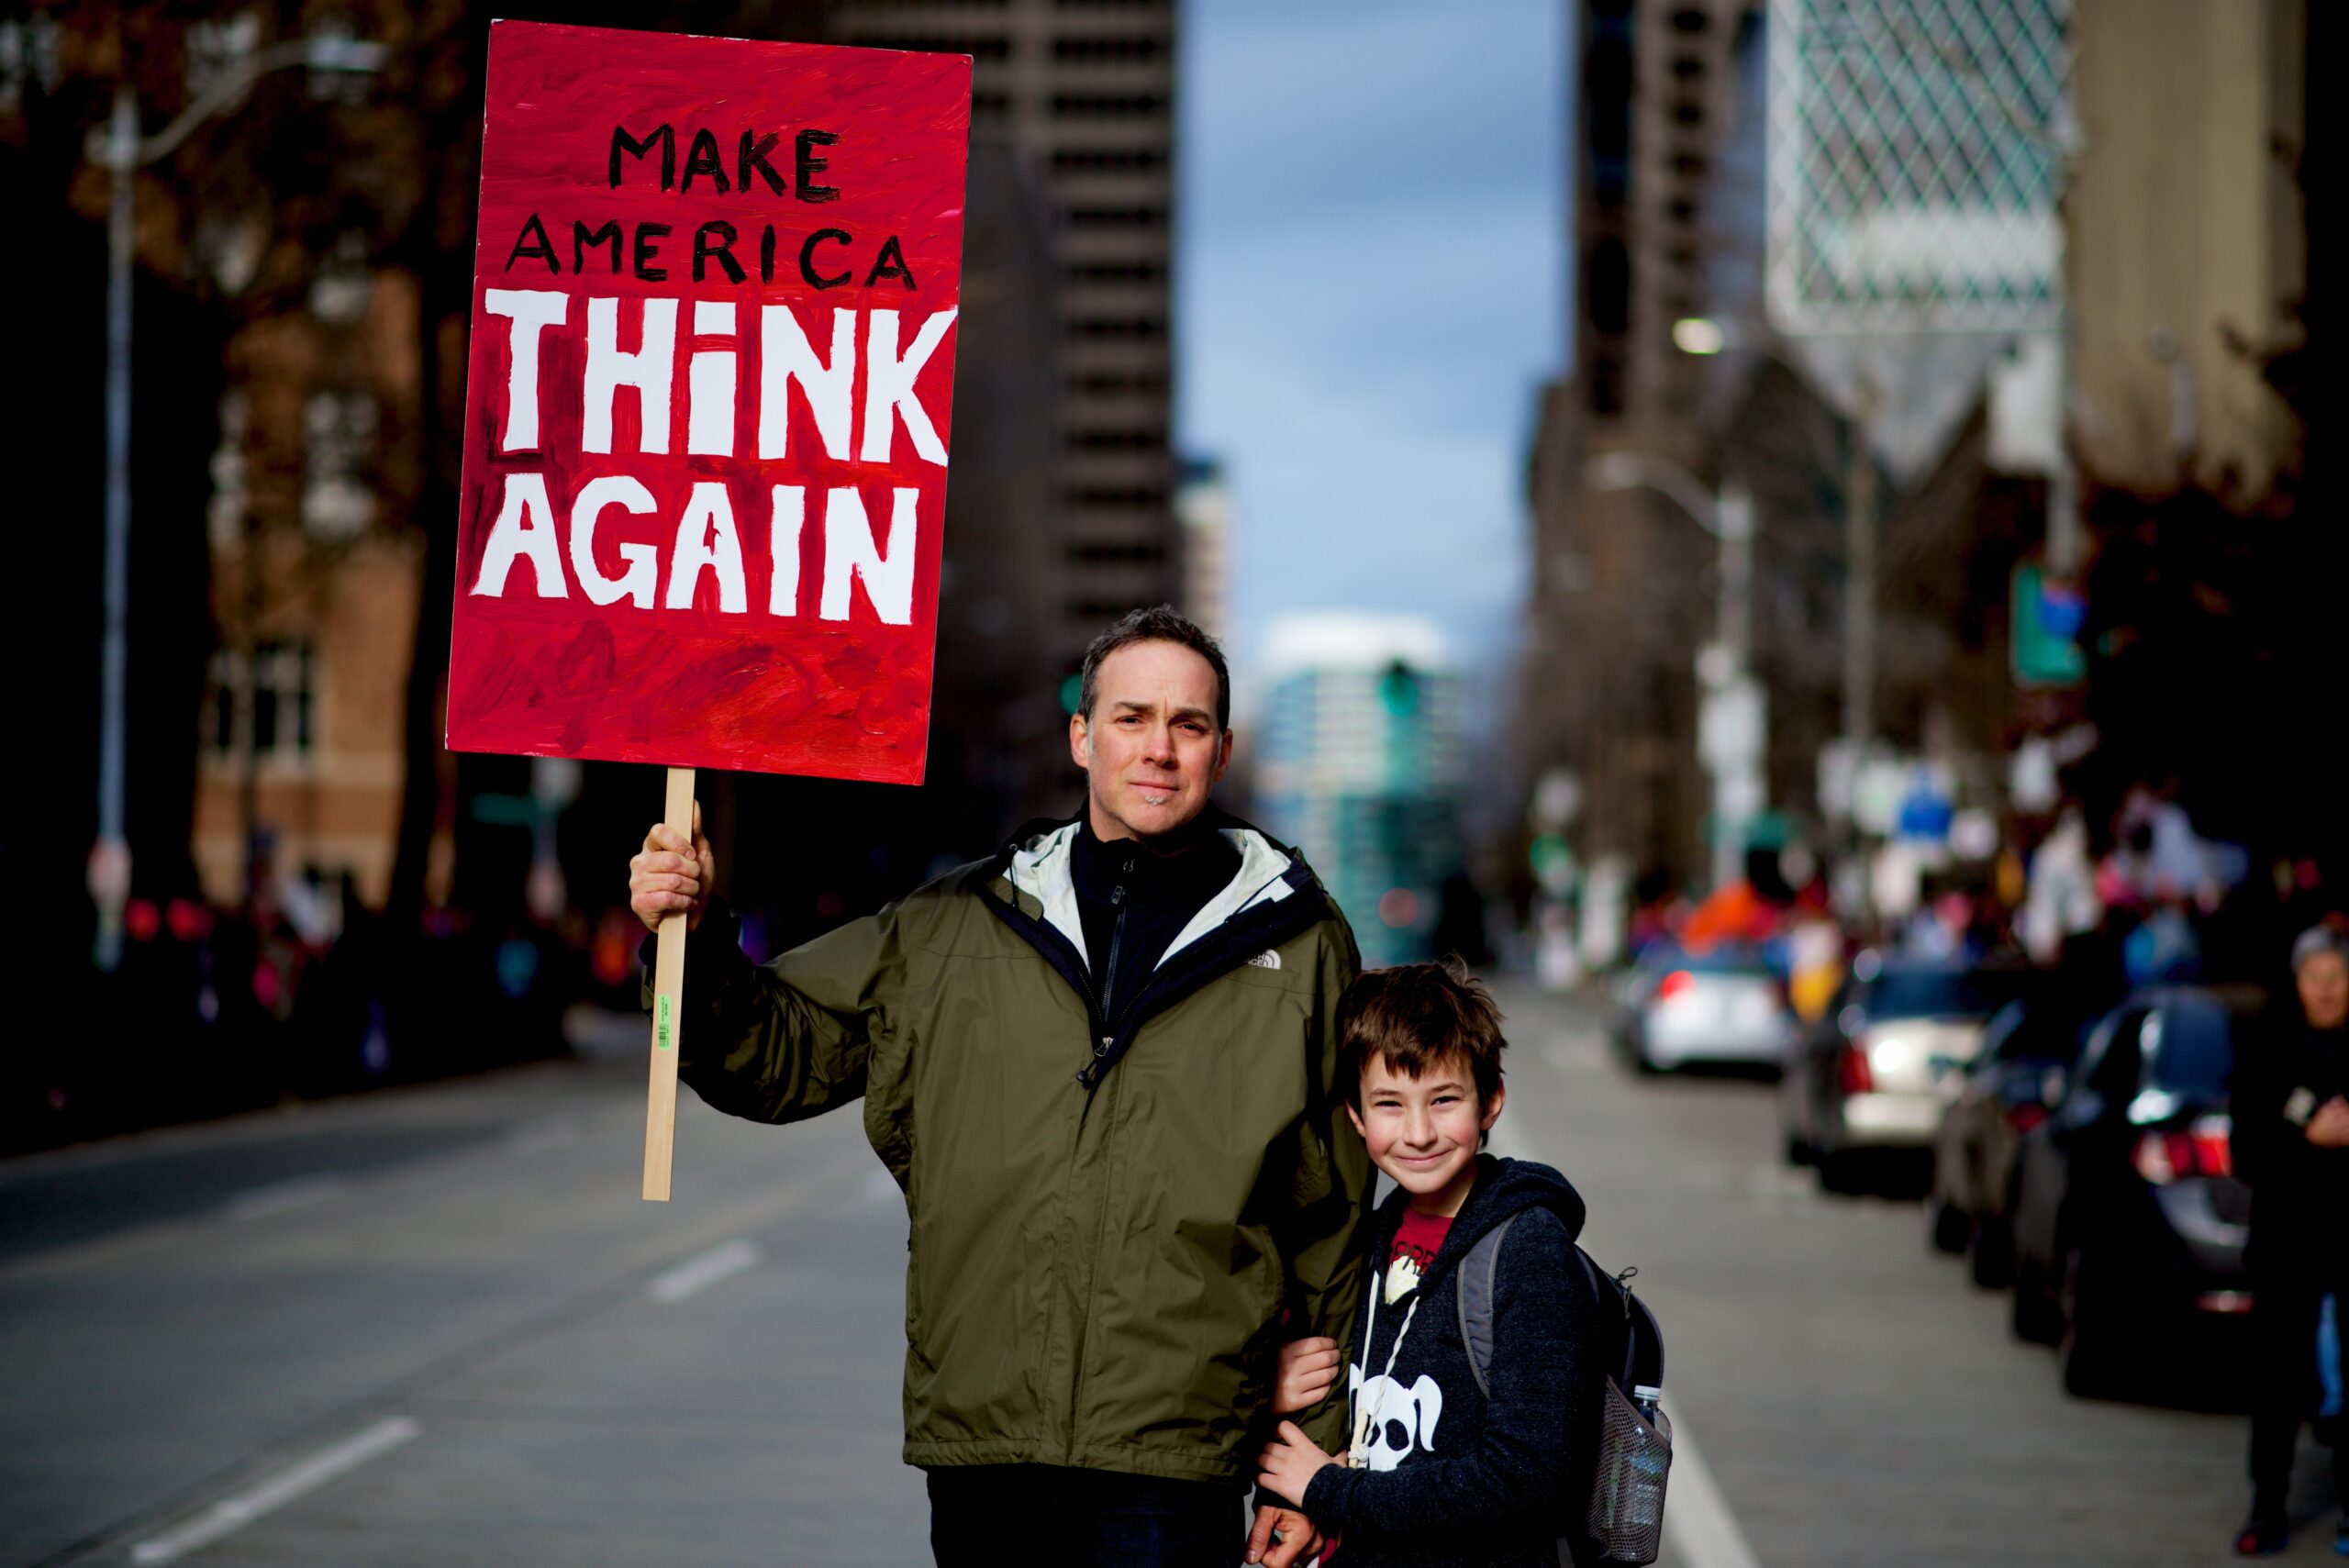 Child stands proudly with his father as his dad holds a sign that reads "Make America Think Again", setting a good example of how we need to stand up for what is right.